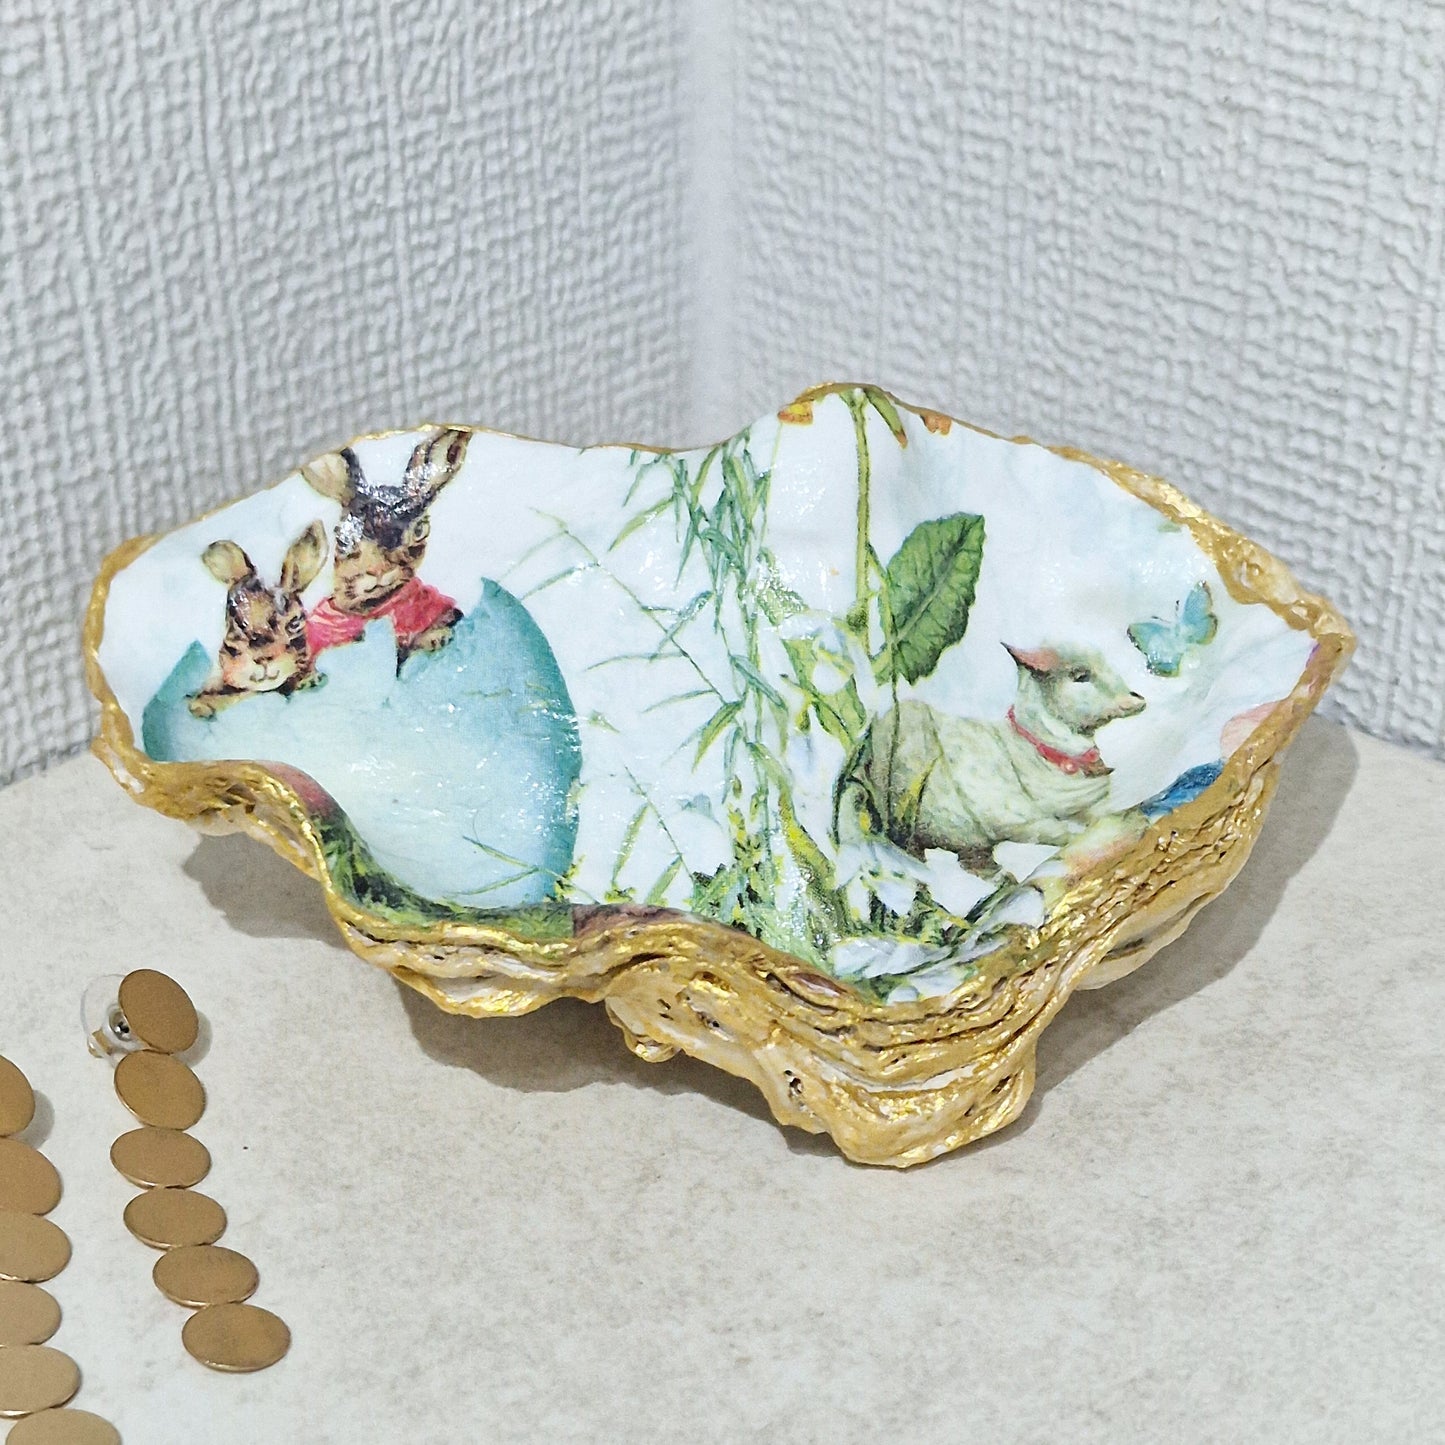 NEW Easter Bunny Lamb Oyster Shell Trinket Dish Jewellery Holder Gift